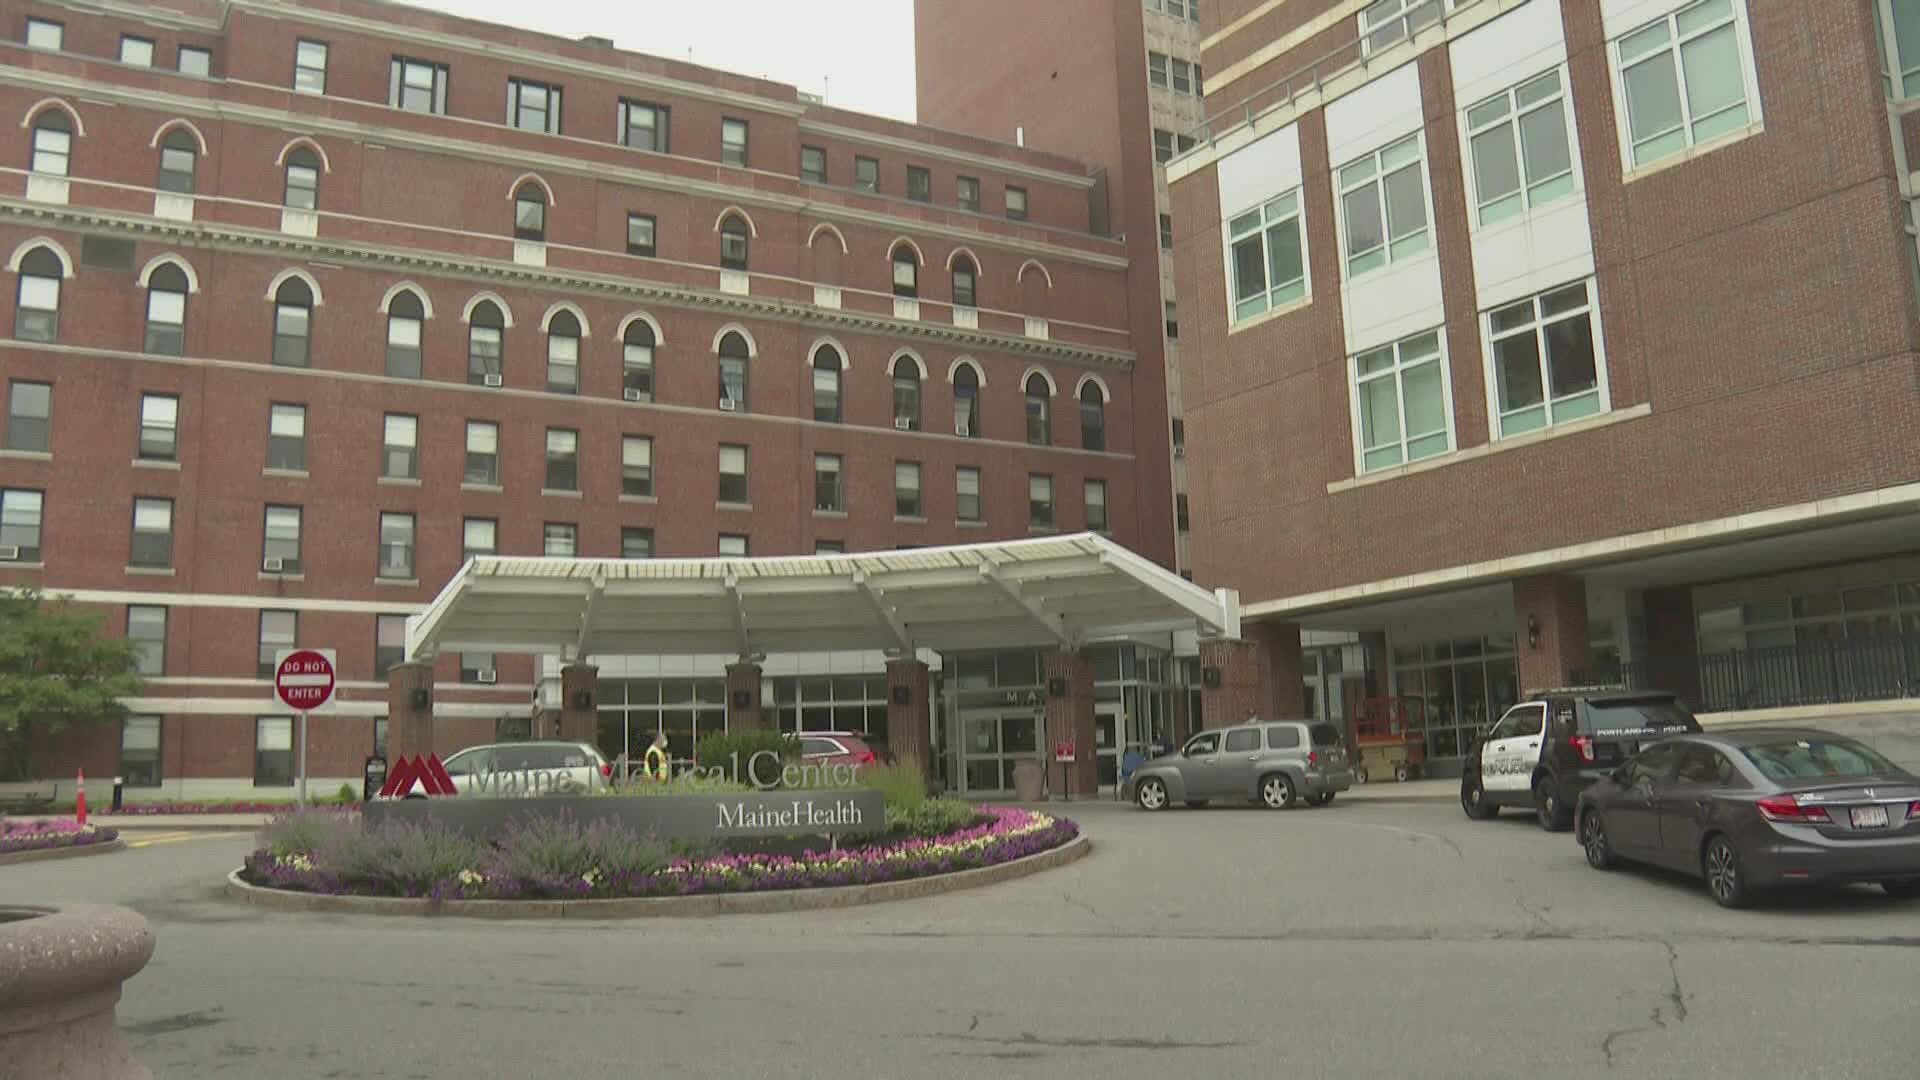 The hospital reported the outbreak to the Maine CDC on August 5.